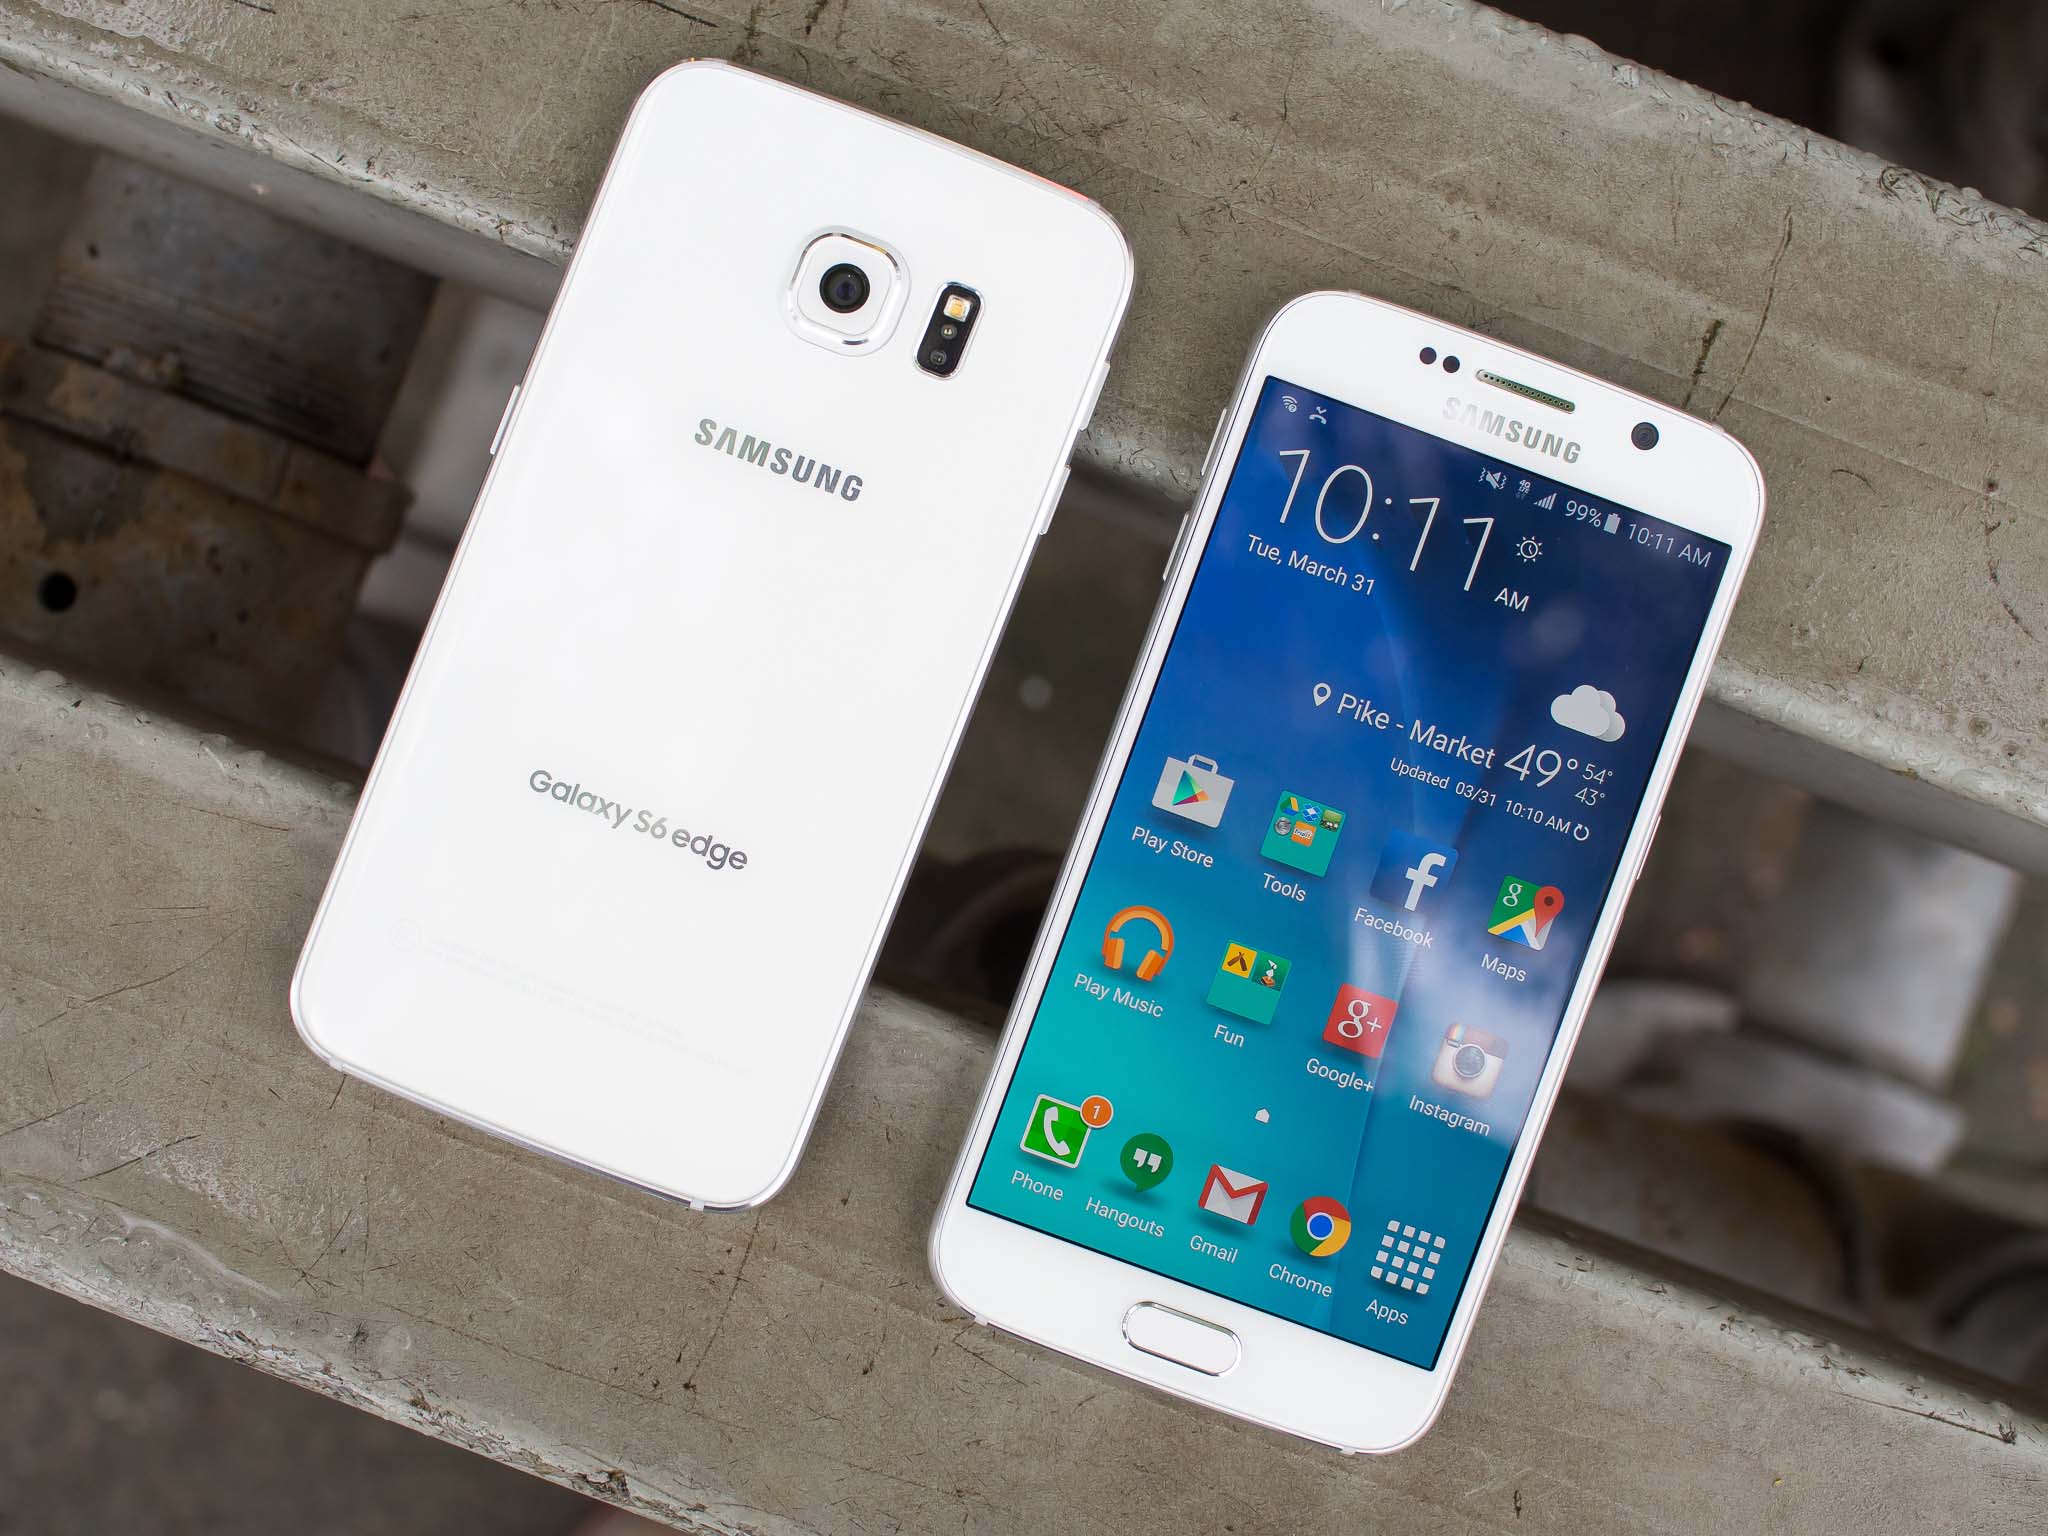 rem Fictief Kijkgat Samsung Galaxy S6 and Galaxy S6 edge review | Android Central